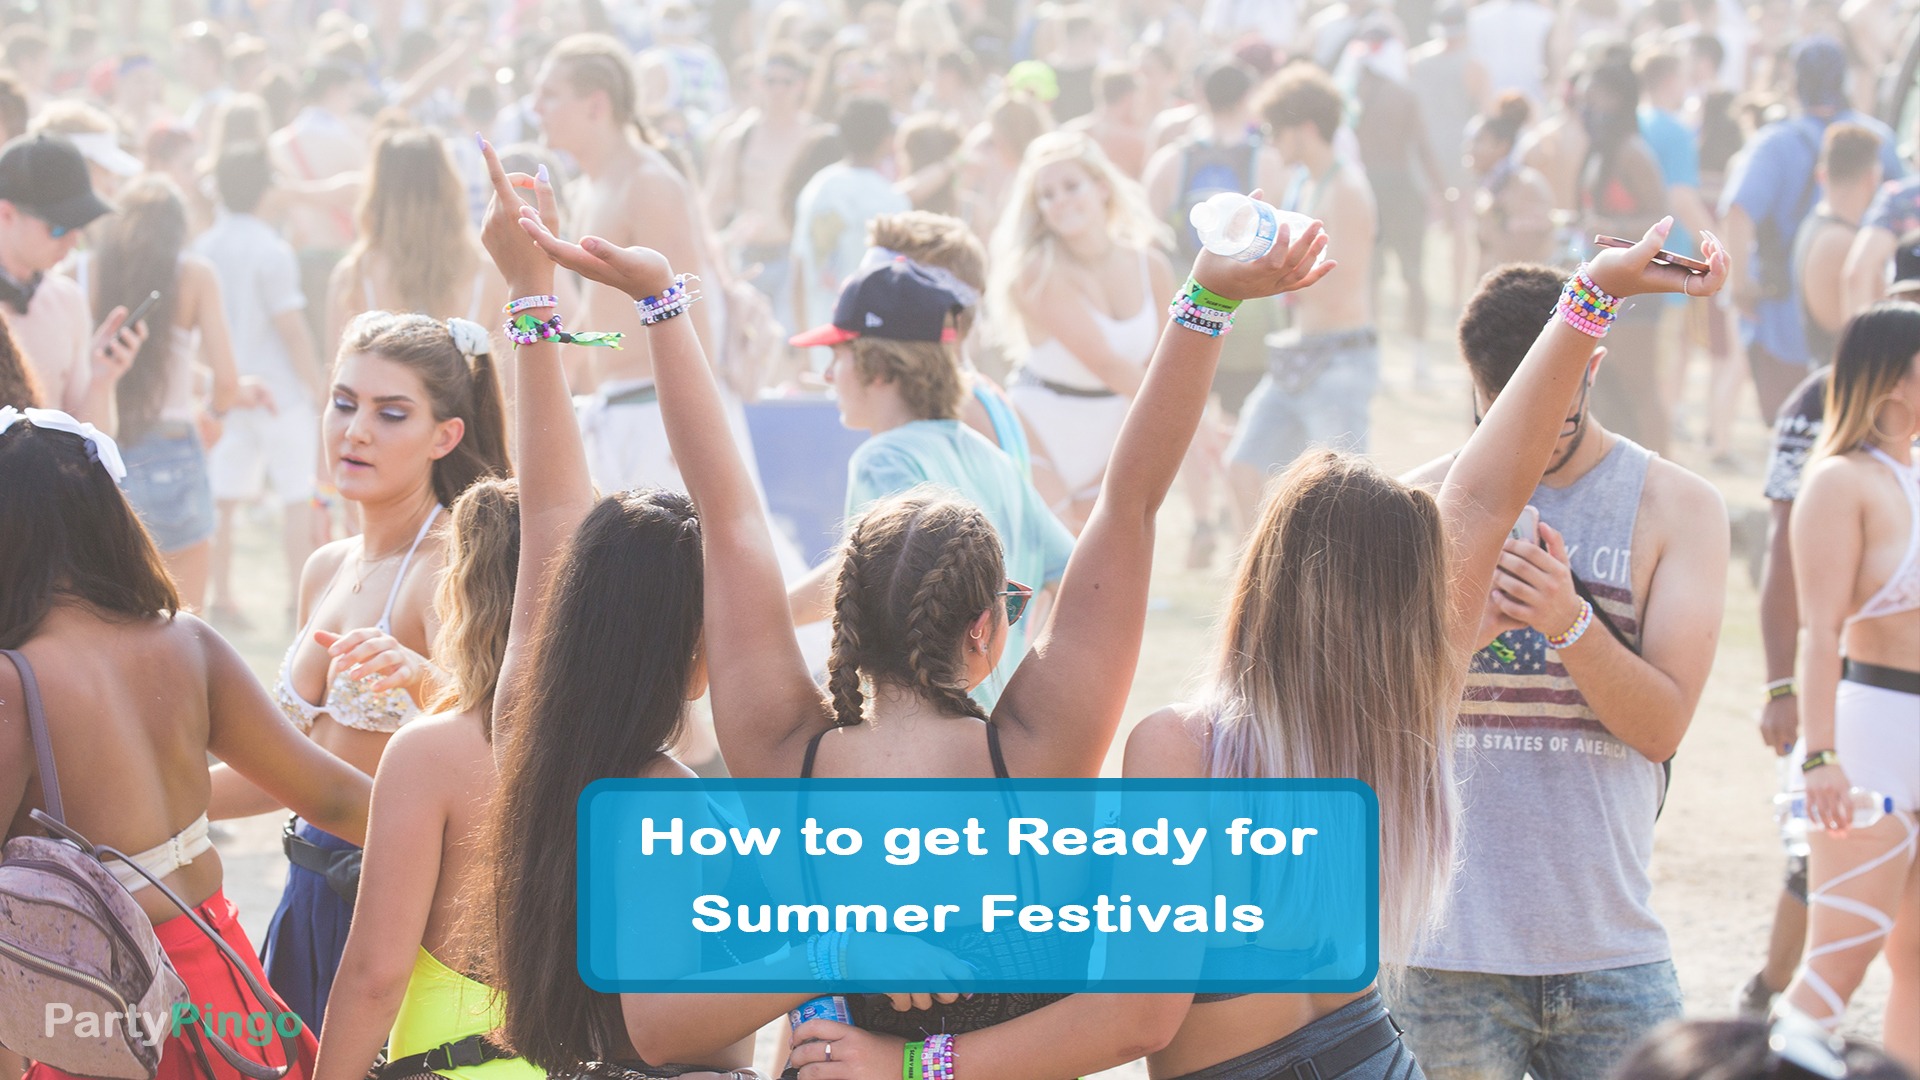 How to get Ready for Summer's many Festivals